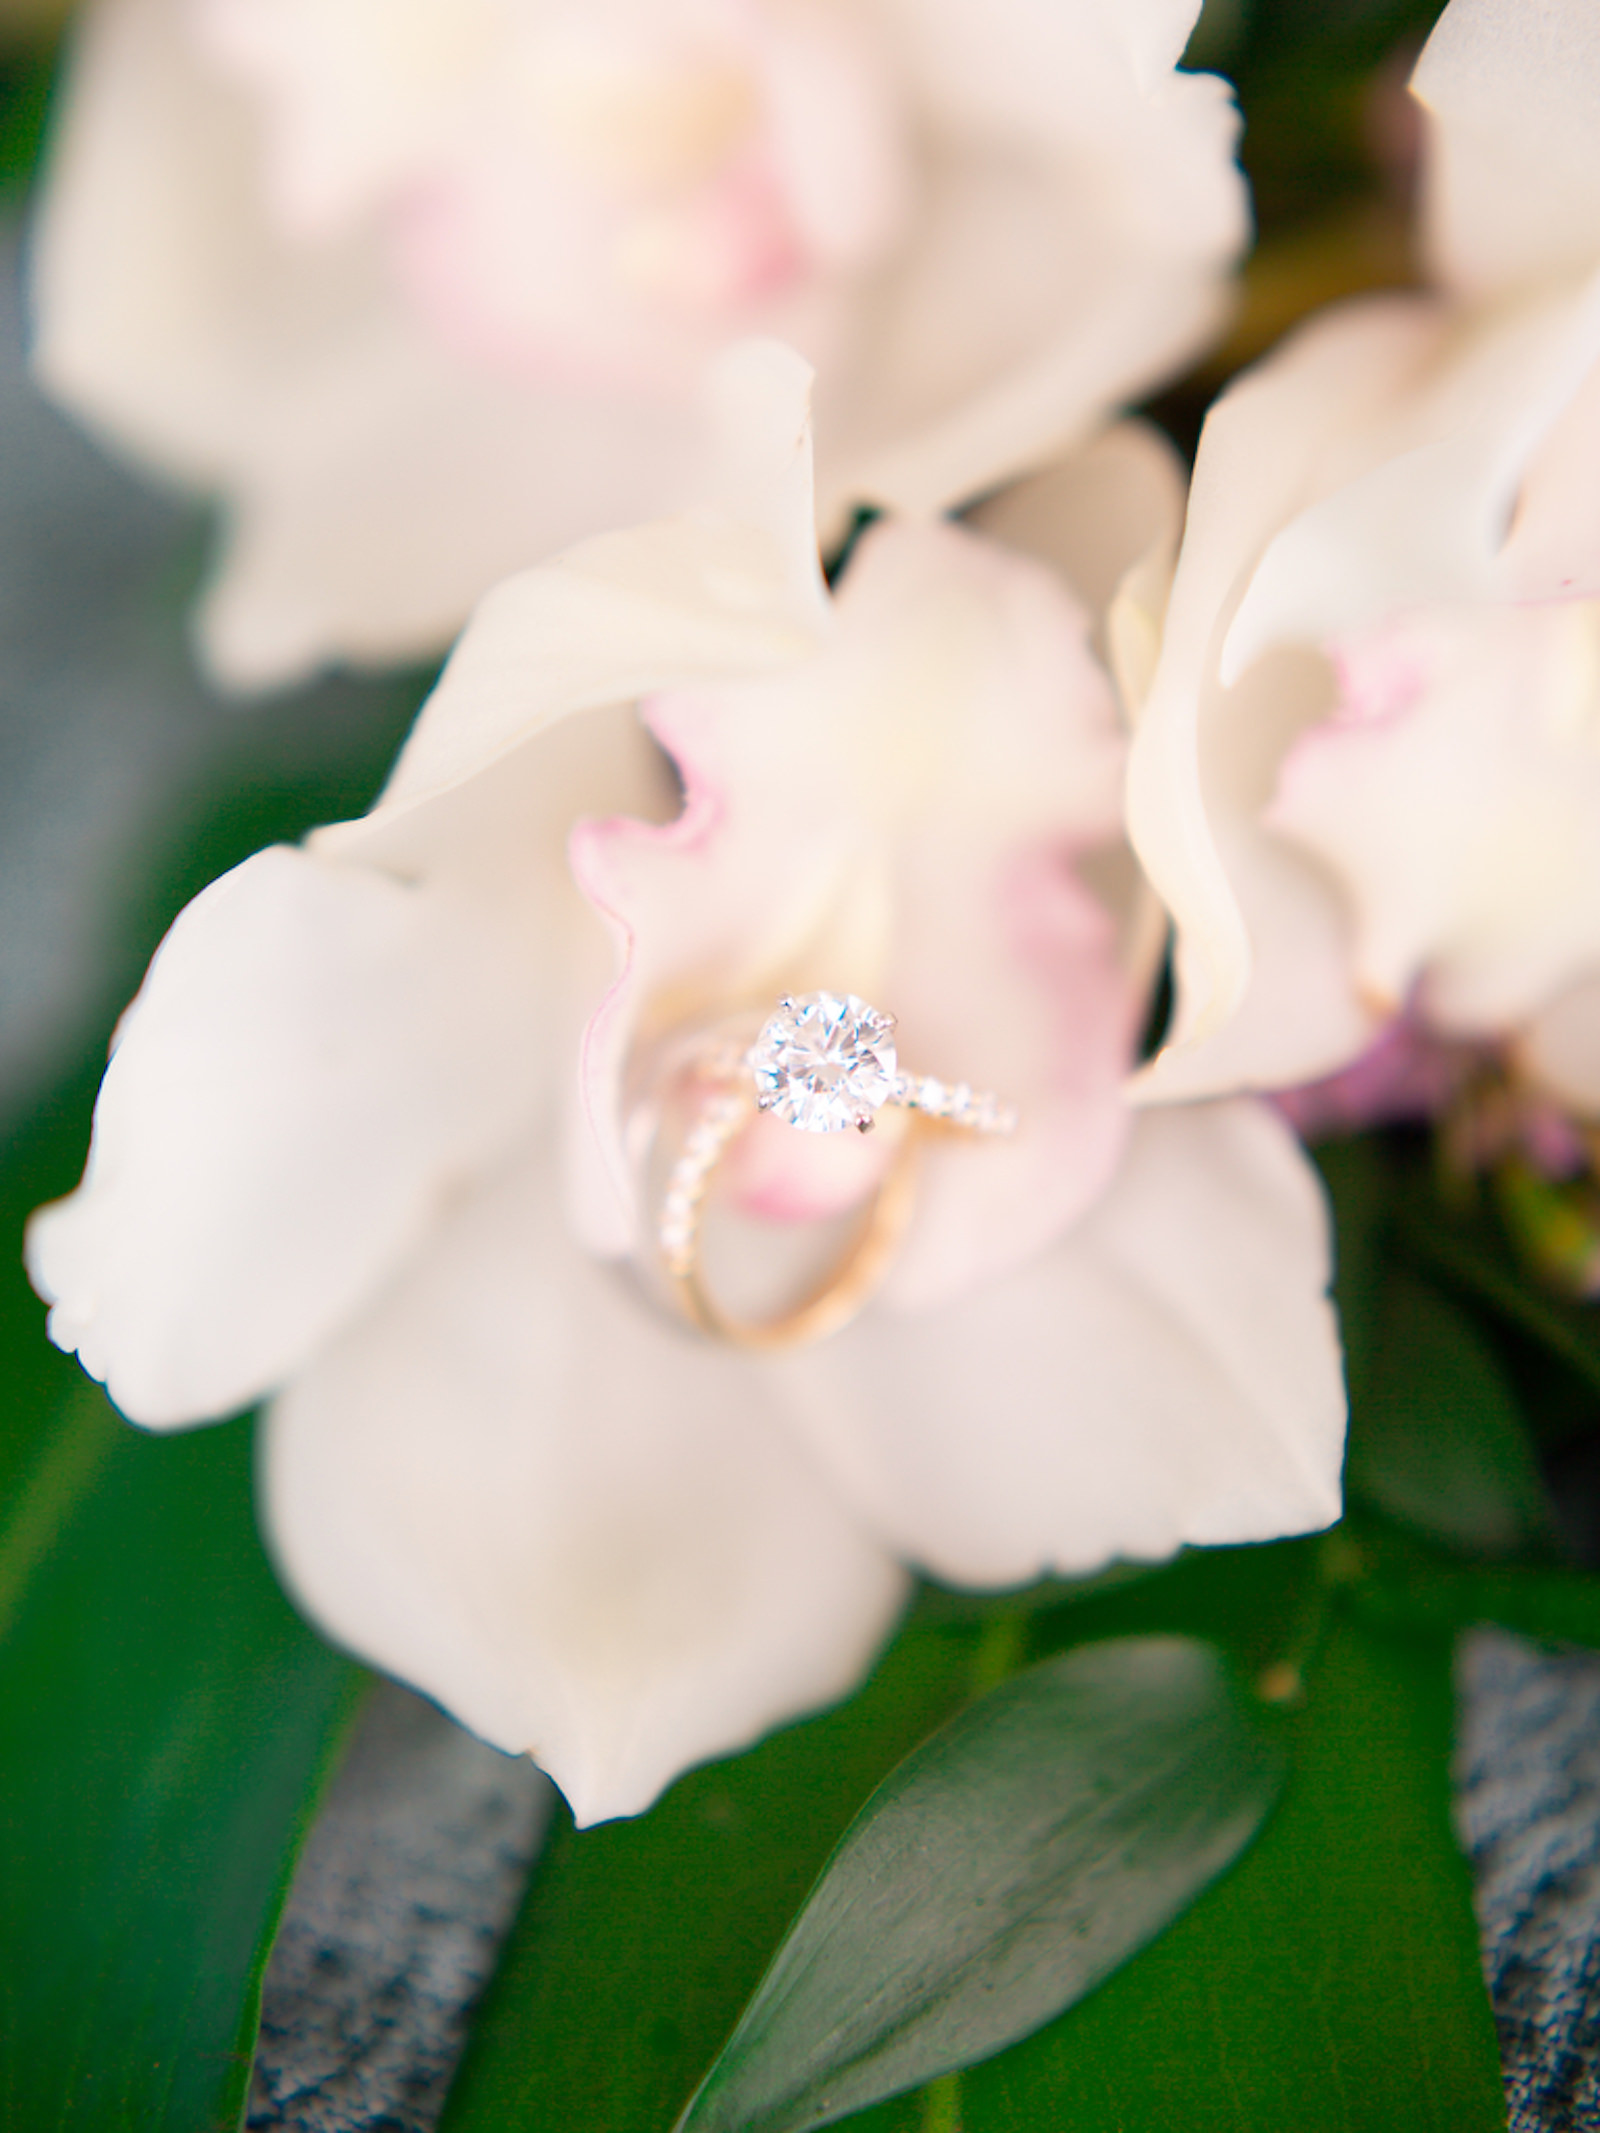 Gold Round Solitaire Engagement Ring and Yellow Gold Diamond Wedding Band on Bed of Tropical Flowers